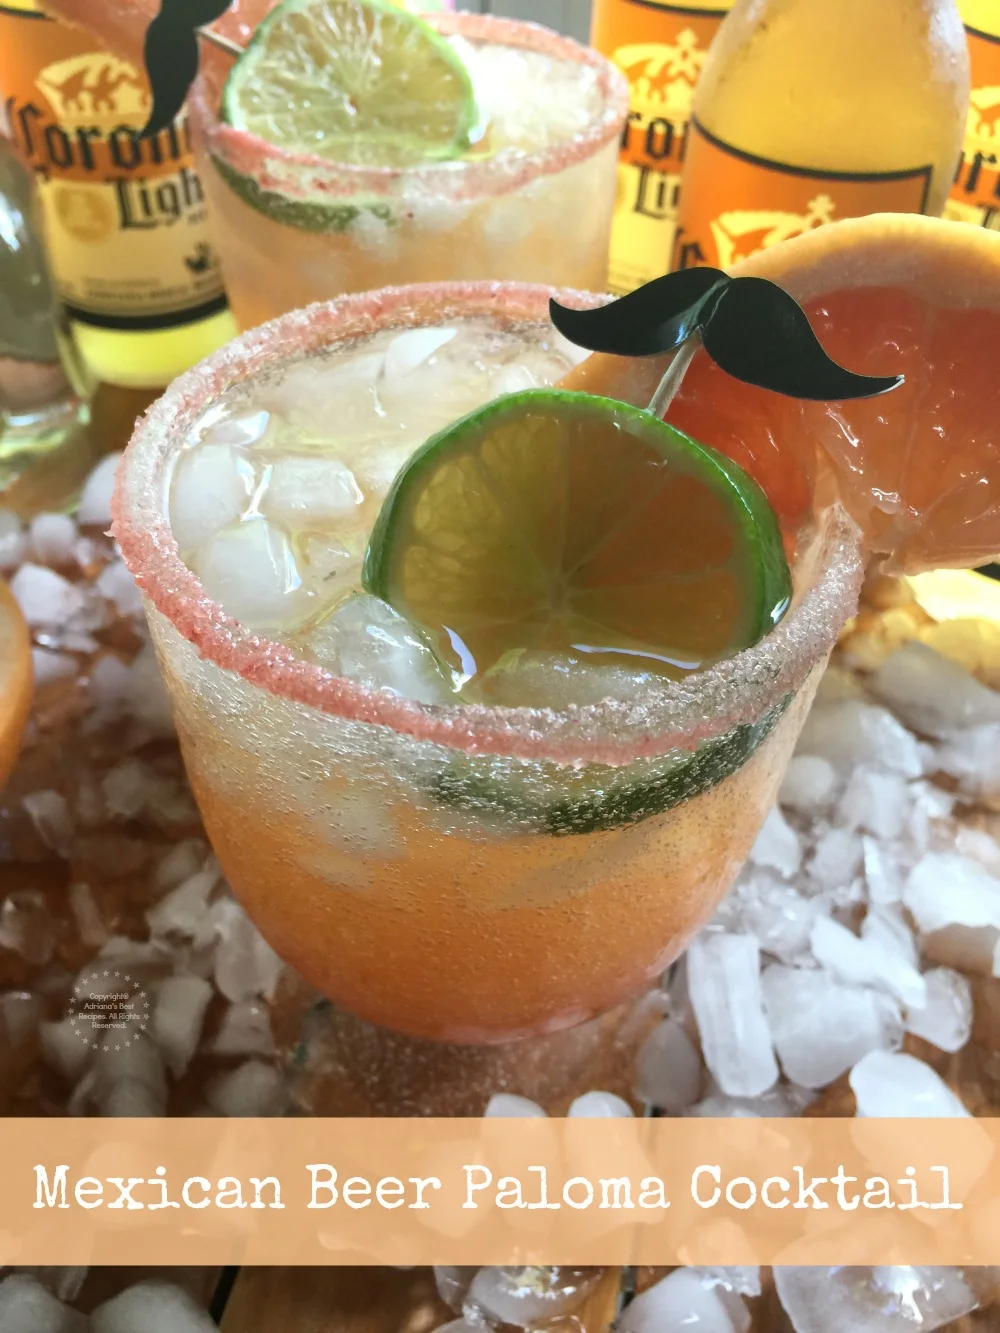 This Mexican Beer Paloma Cocktail has grapefruit juice, crushed ice, Casa Noble tequila blanco, pink salt, liquid chamoy, lime, grapefruit slices and Corona Light